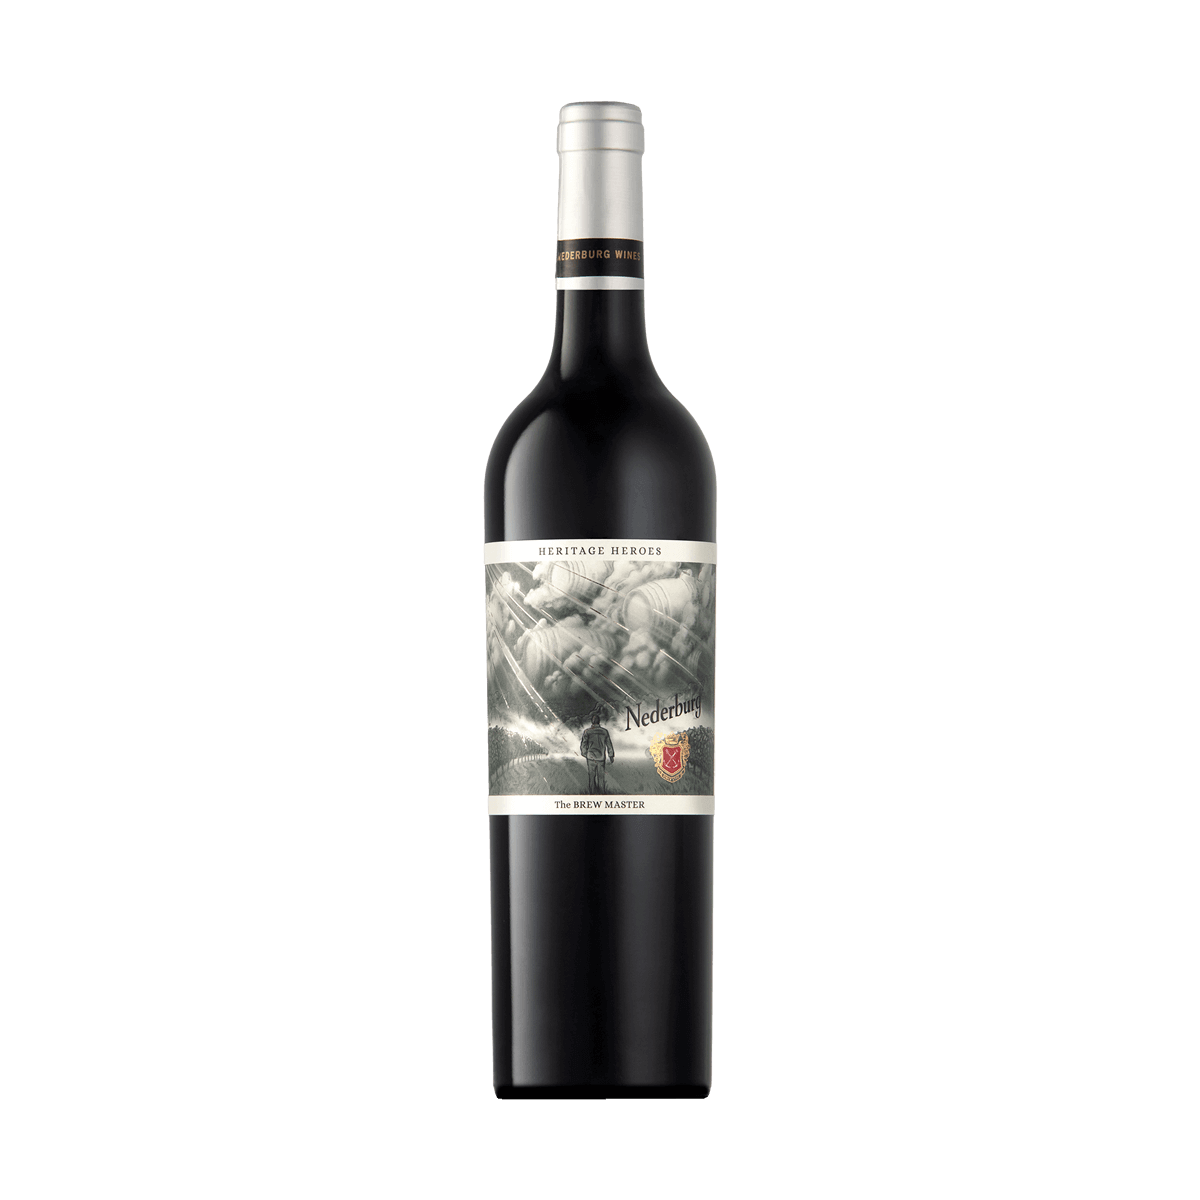 Nederburg The Brew Master Bordeaux-style Red Blend 2019